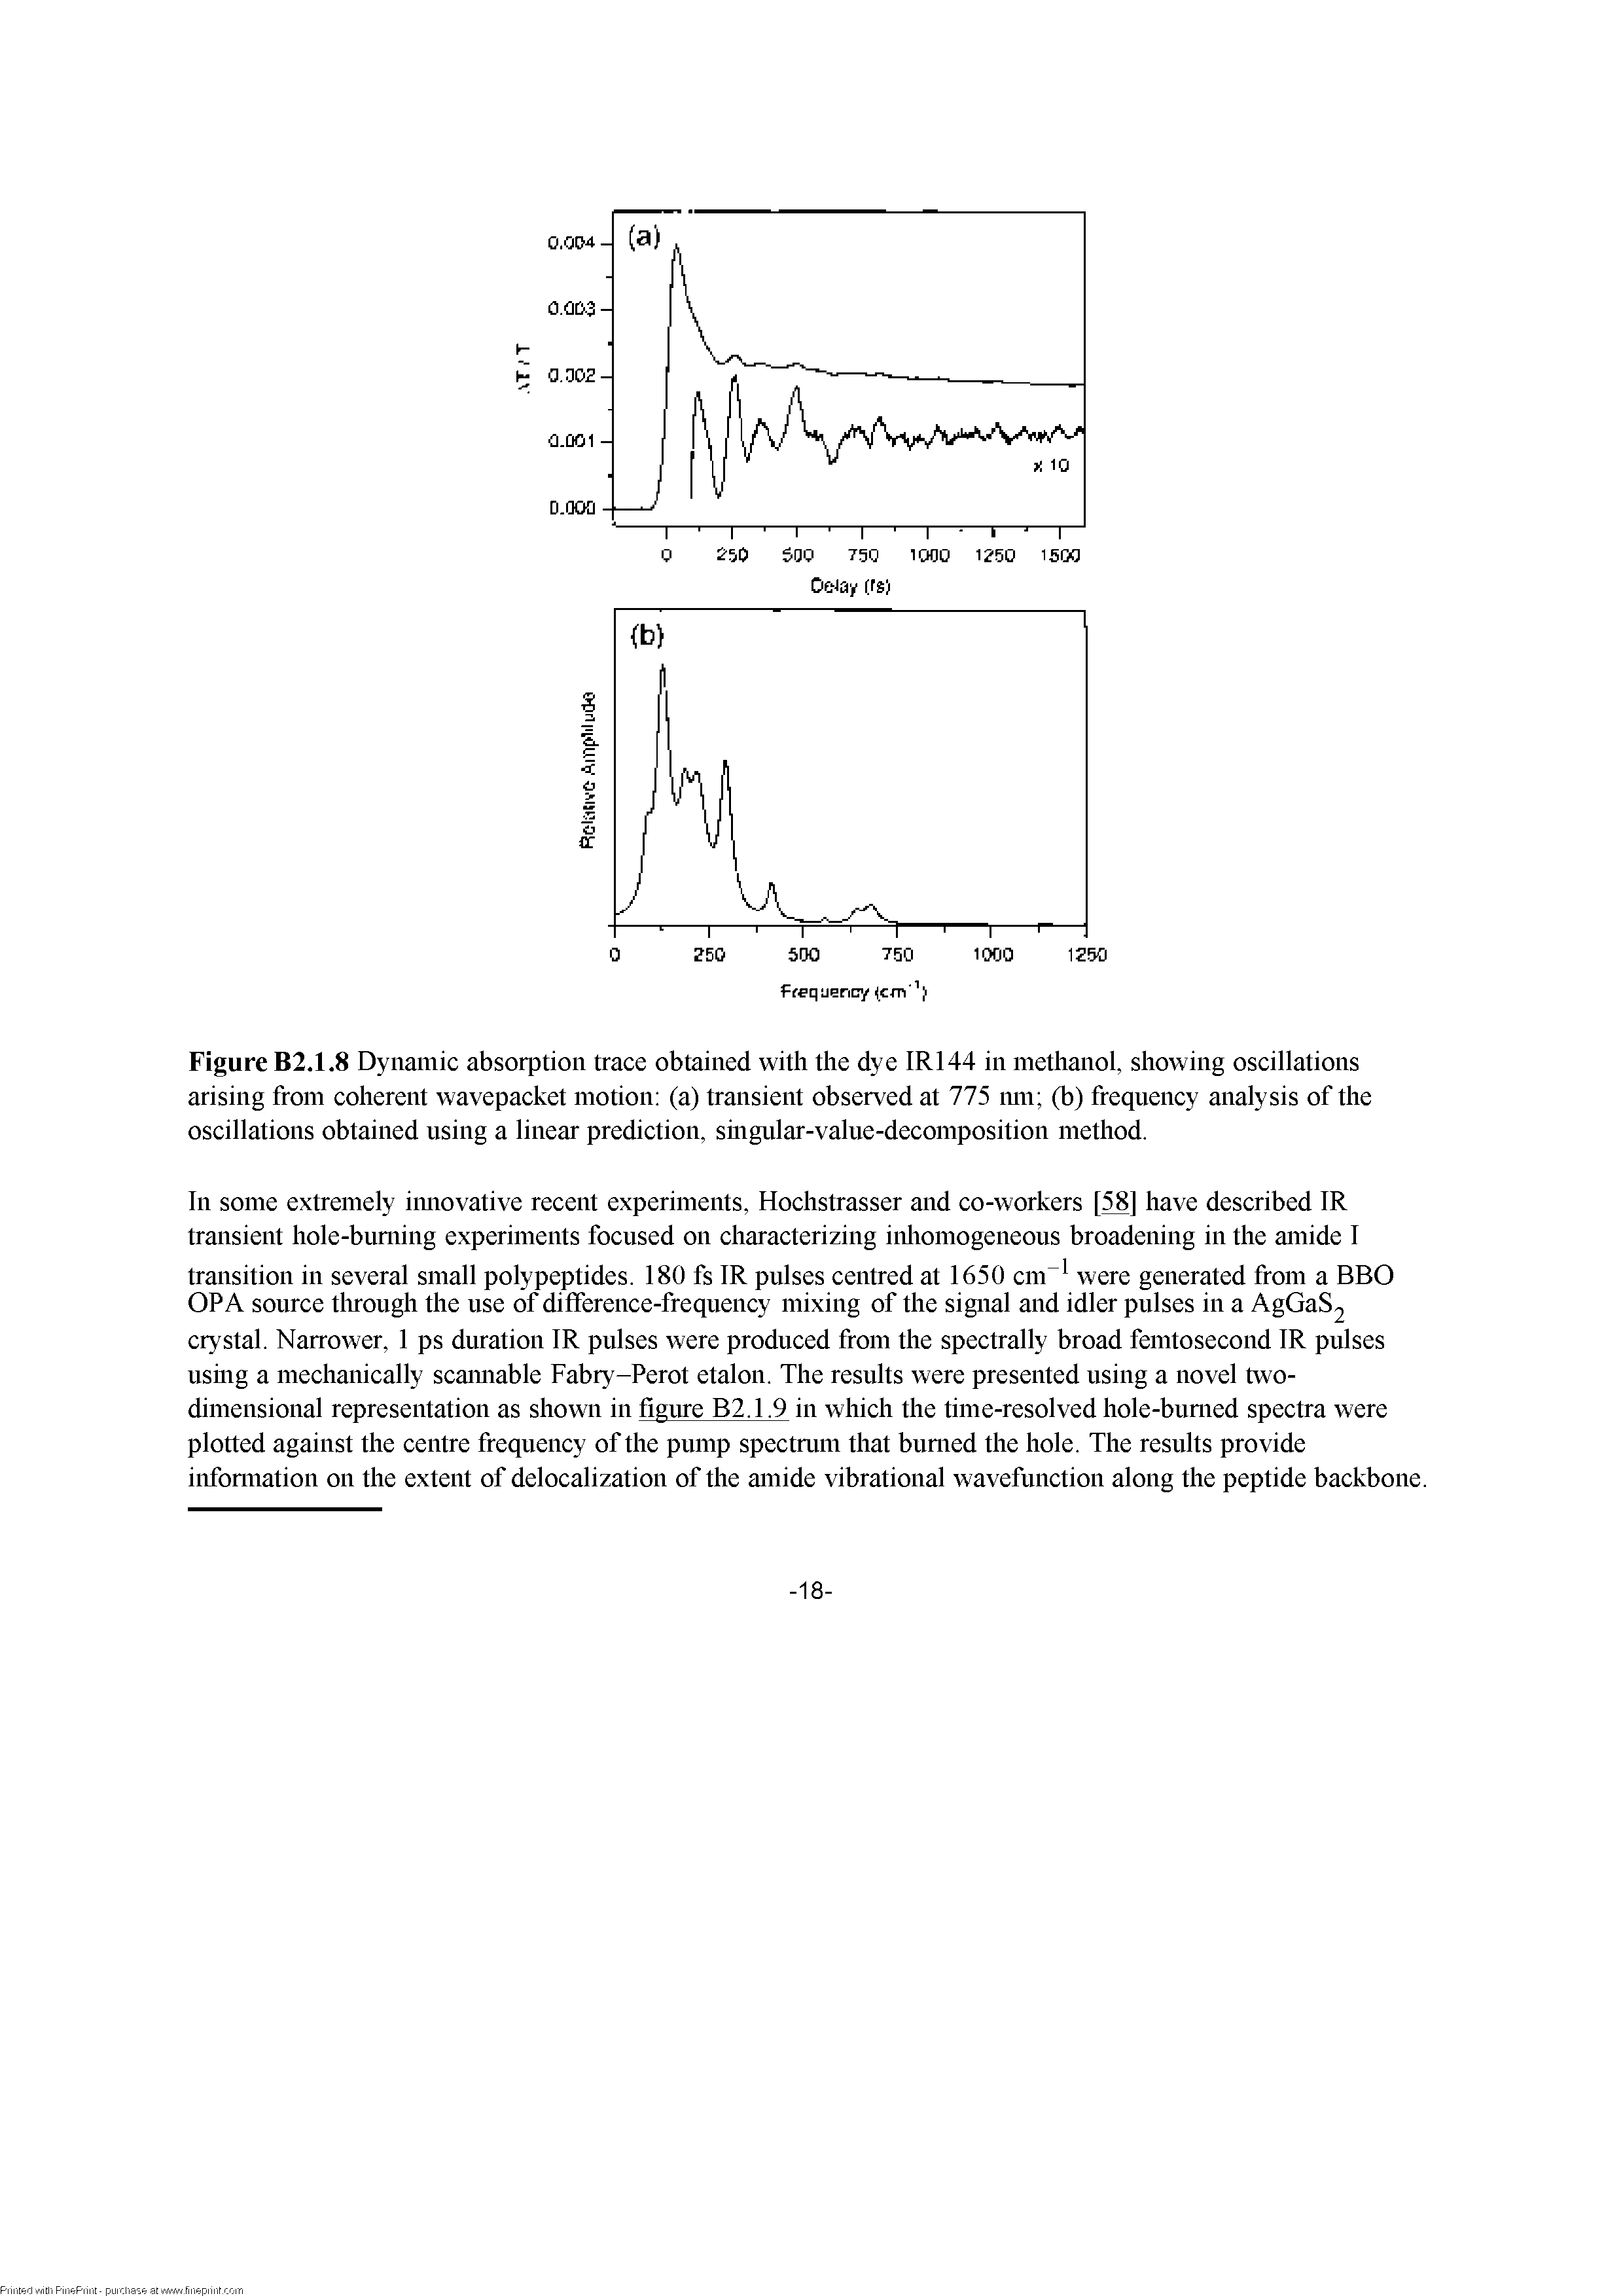 Figure B2.1.8 Dynamic absorption trace obtained with the dye IR144 in methanol, showing oscillations arising from coherent wavepacket motion (a) transient observed at 775 mn (b) frequency analysis of the oscillations obtained using a linear prediction, smgular-value-decomposition method.